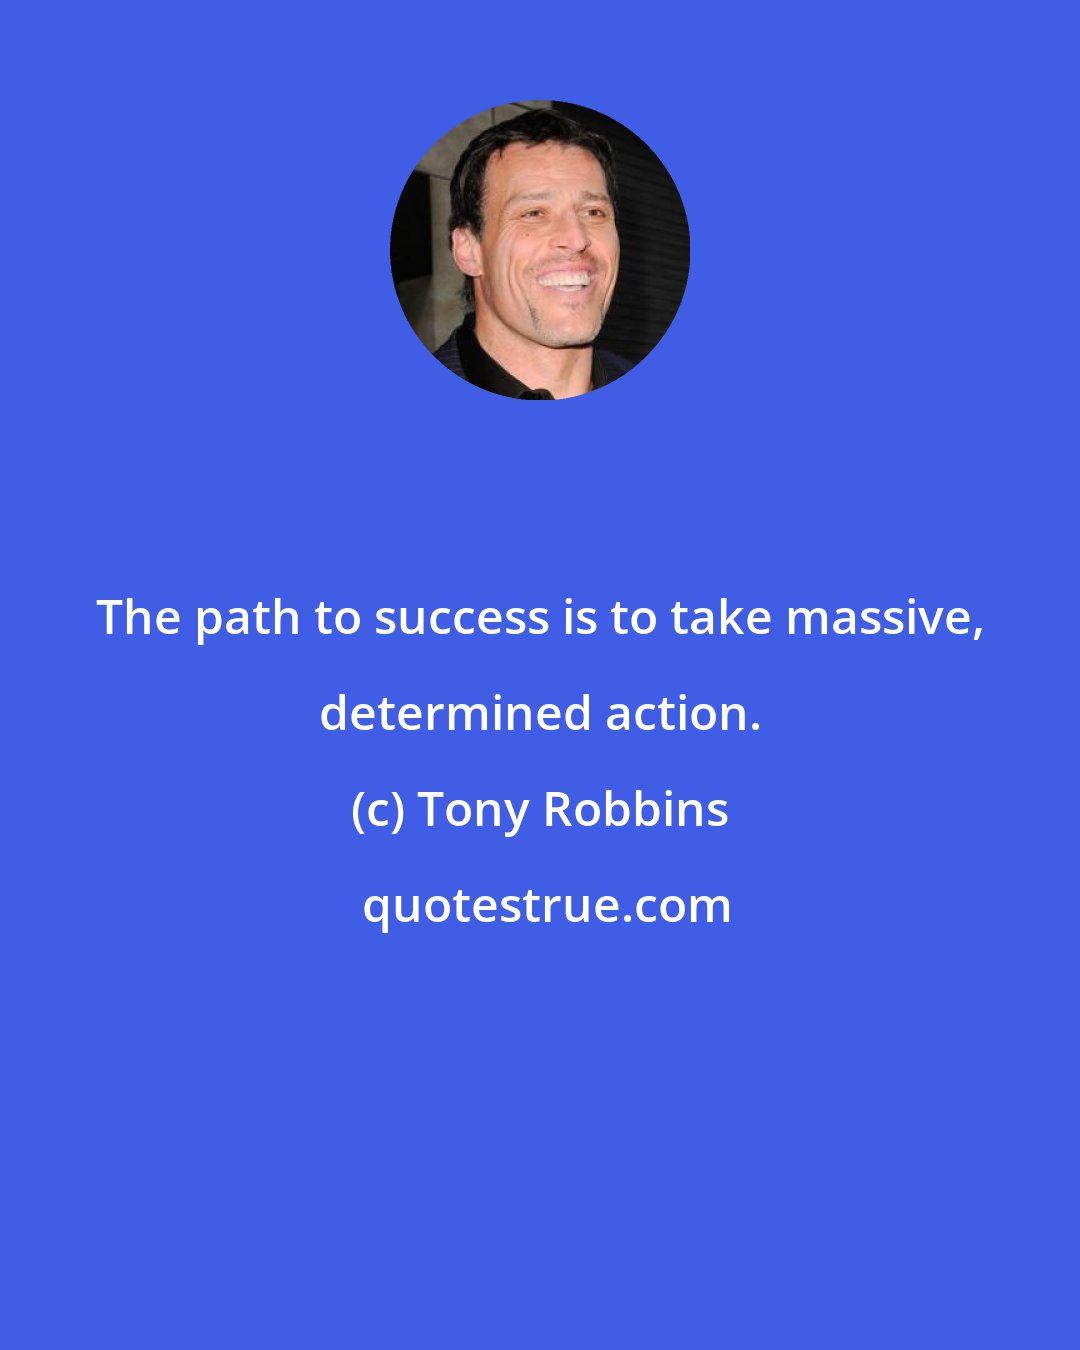 Tony Robbins: The path to success is to take massive, determined action.